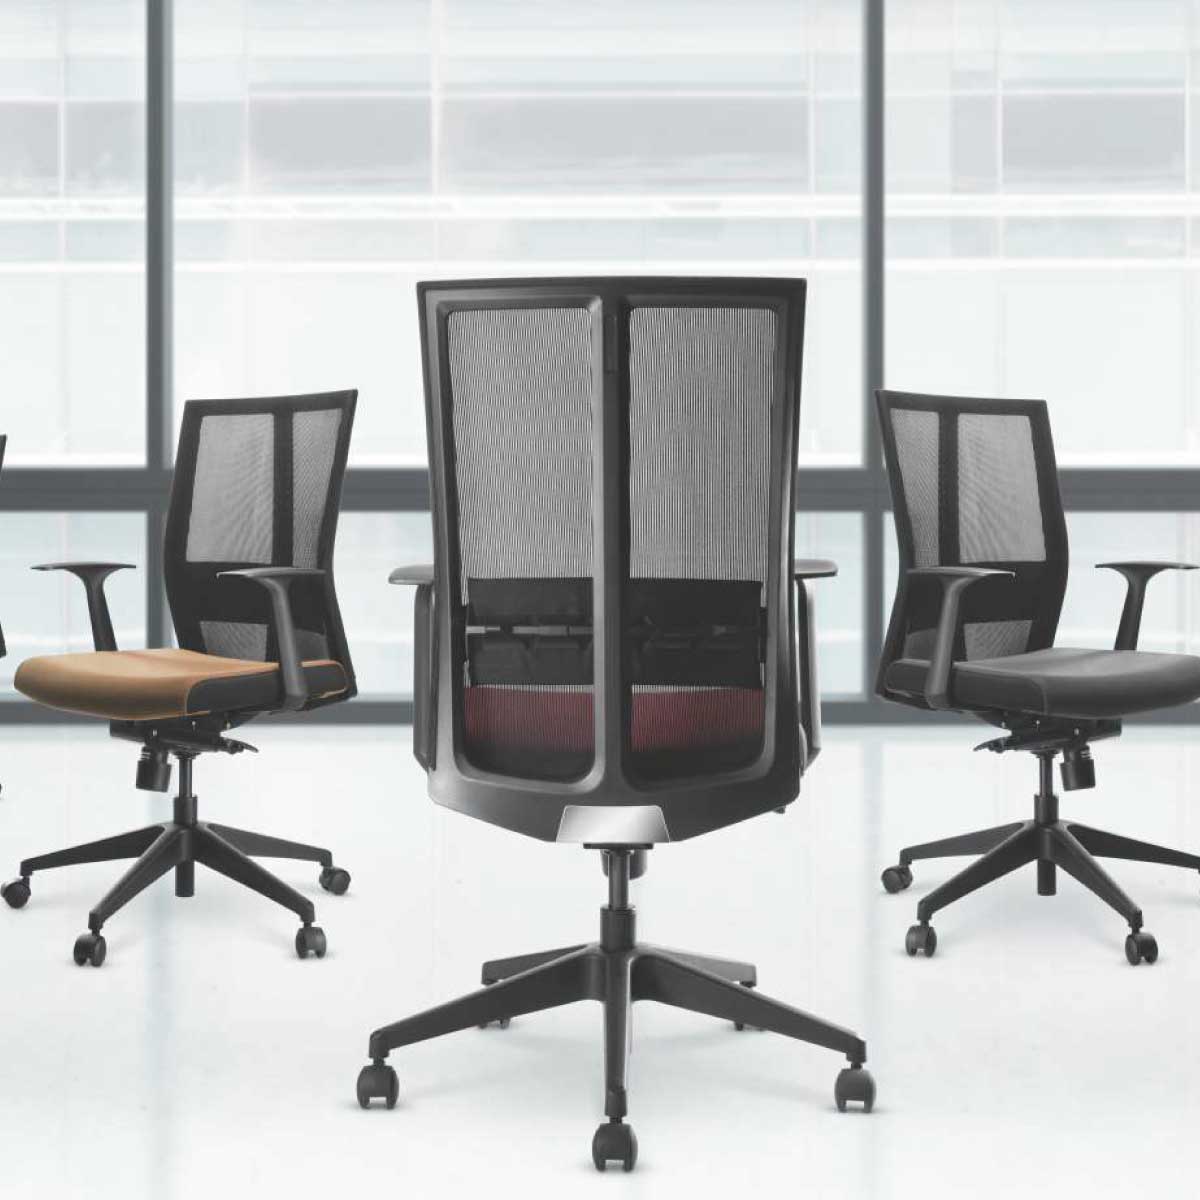 Visitor Chair Manufacturers, Suppliers in Soami Nagar